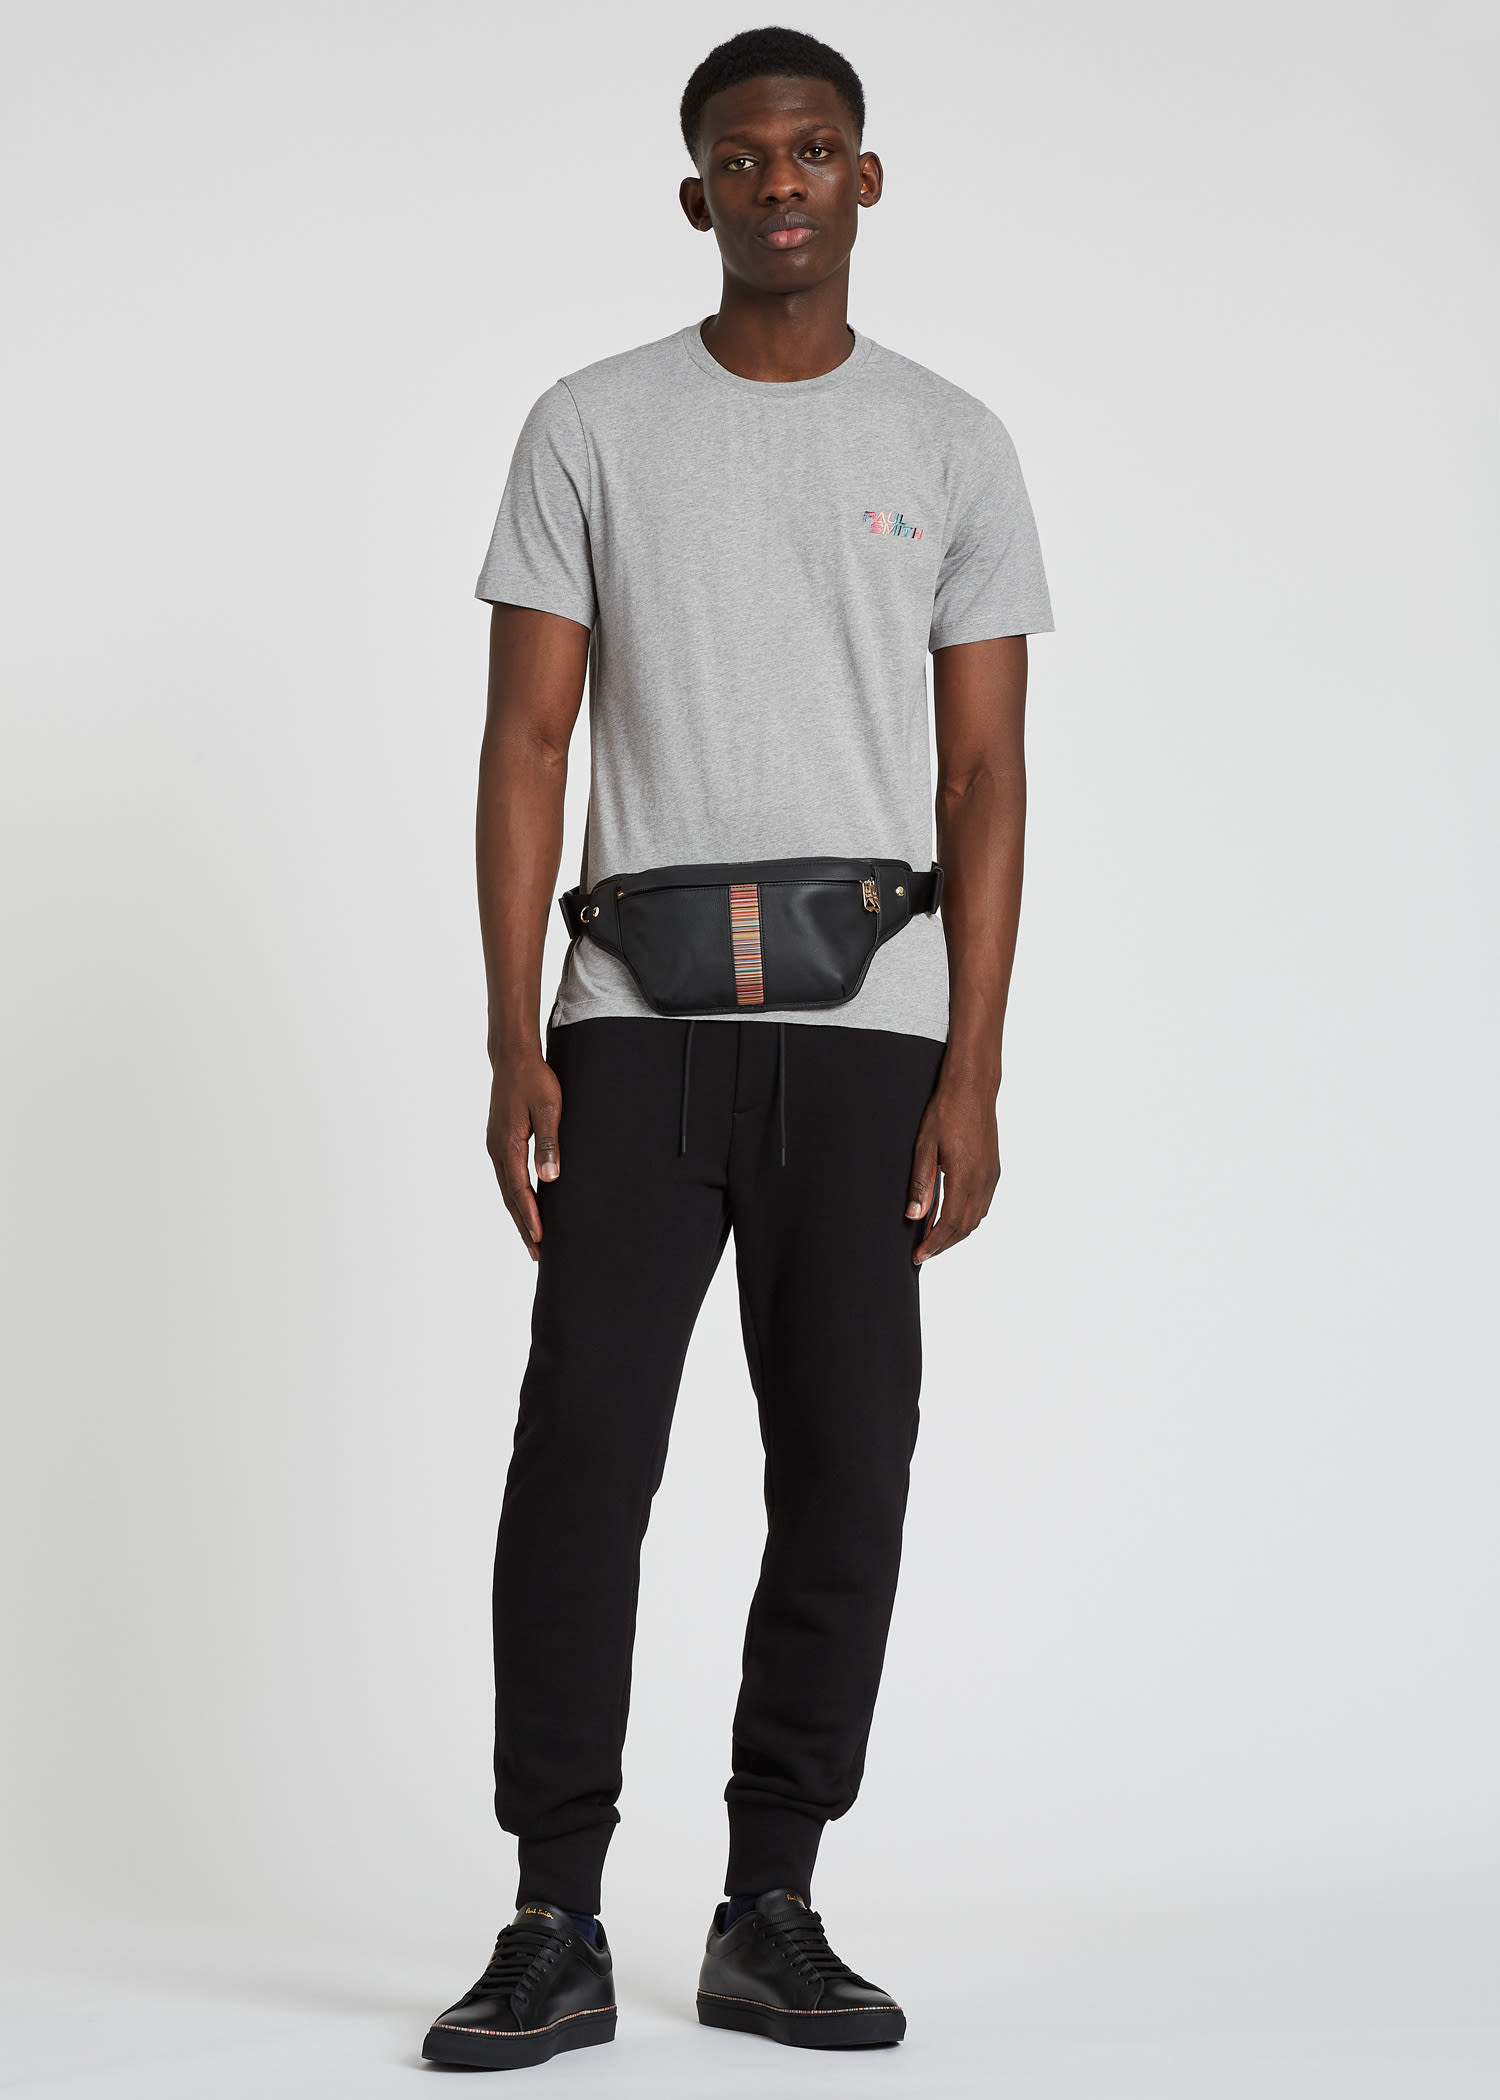 waist bags and bumbags Mens Bags Belt Bags PS by Paul Smith Synthetic Zebra Logo Canvas Bumbag in Black for Men 